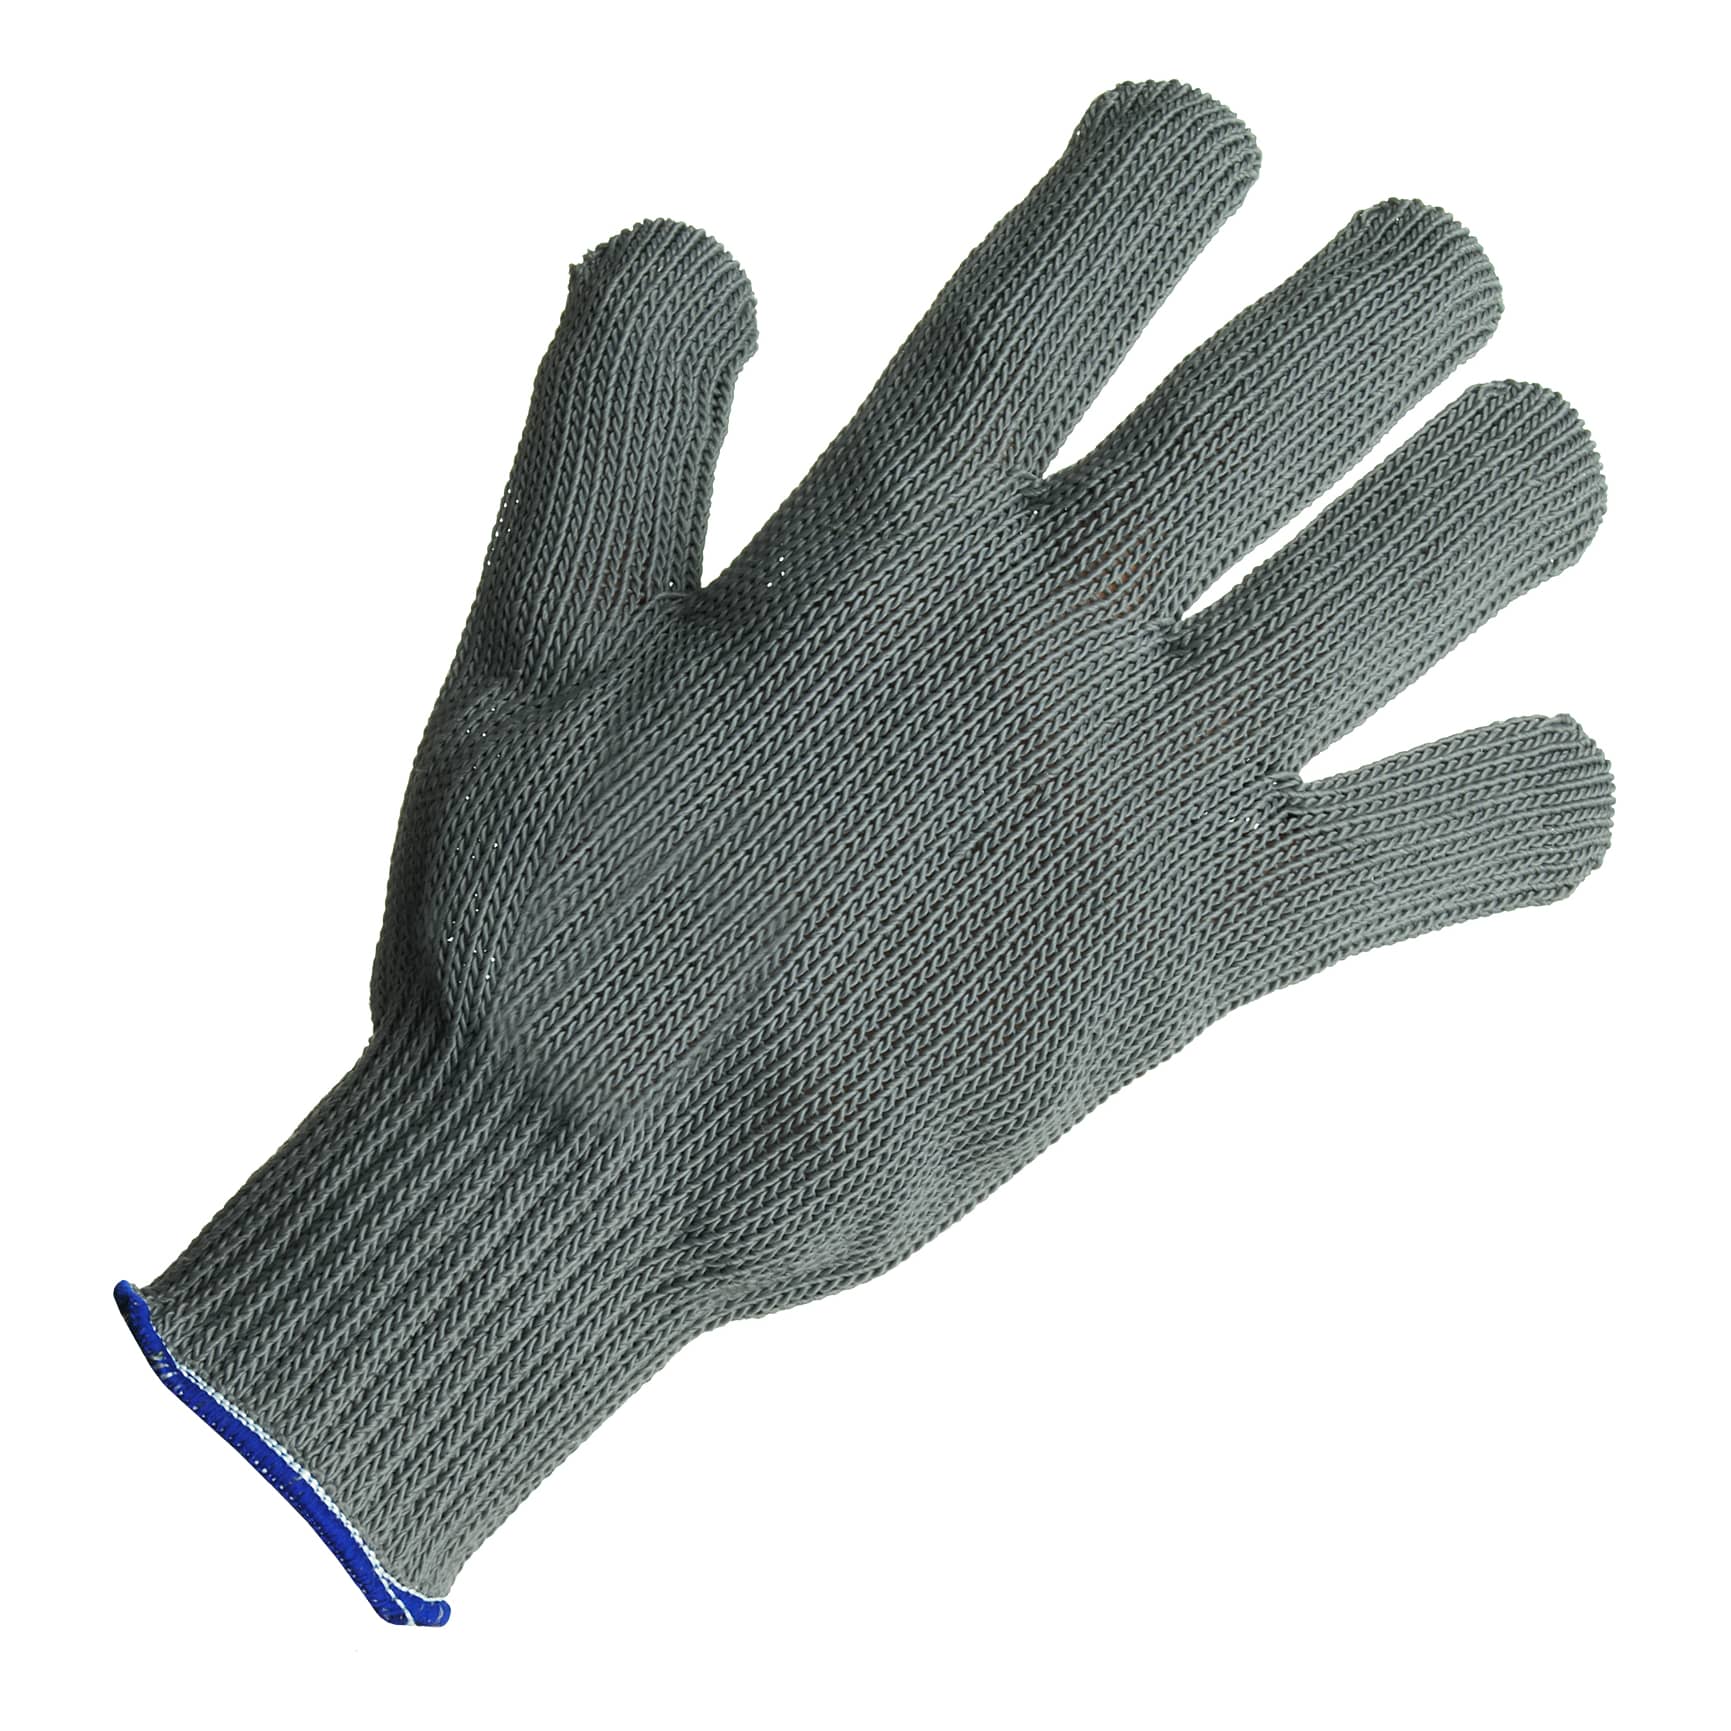 Cuda Offshore Gloves, Extra Large